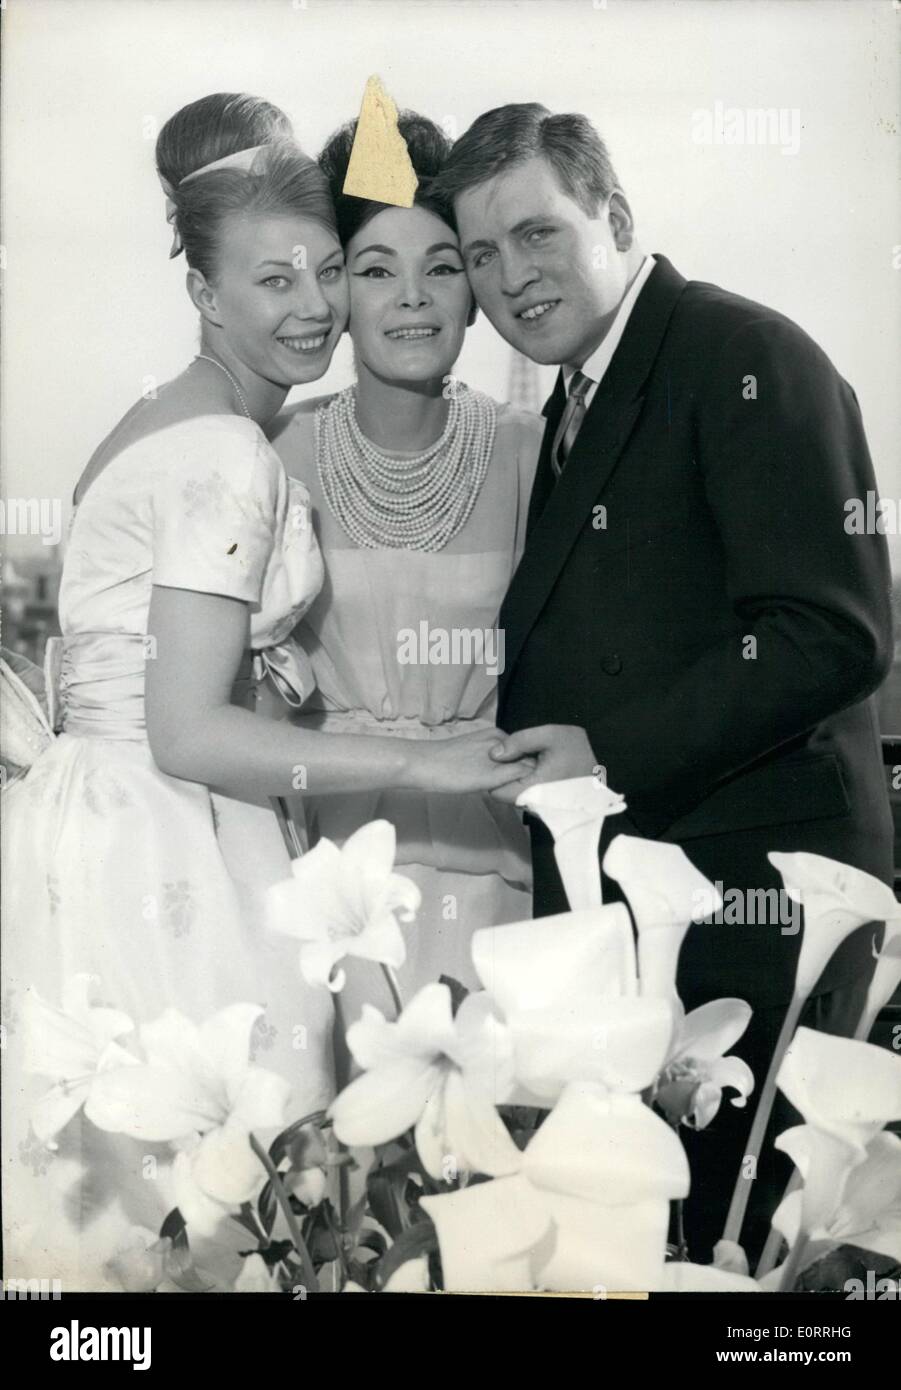 May 05, 1960 - Lucky's Daughter to wed:Eighteen Year old Michele Luck's Daughter, will Mary Jean Louis Solminac, 26 who runs with his father a big transport n company. Lucky, one of the leading and best known French Haute Couture Mannequin announced her daughter's engagement today. Photo shows Lucky (centre) pictured with her daughter Michele and Michele's Fiance Jean, Louis Solminac. Stock Photo